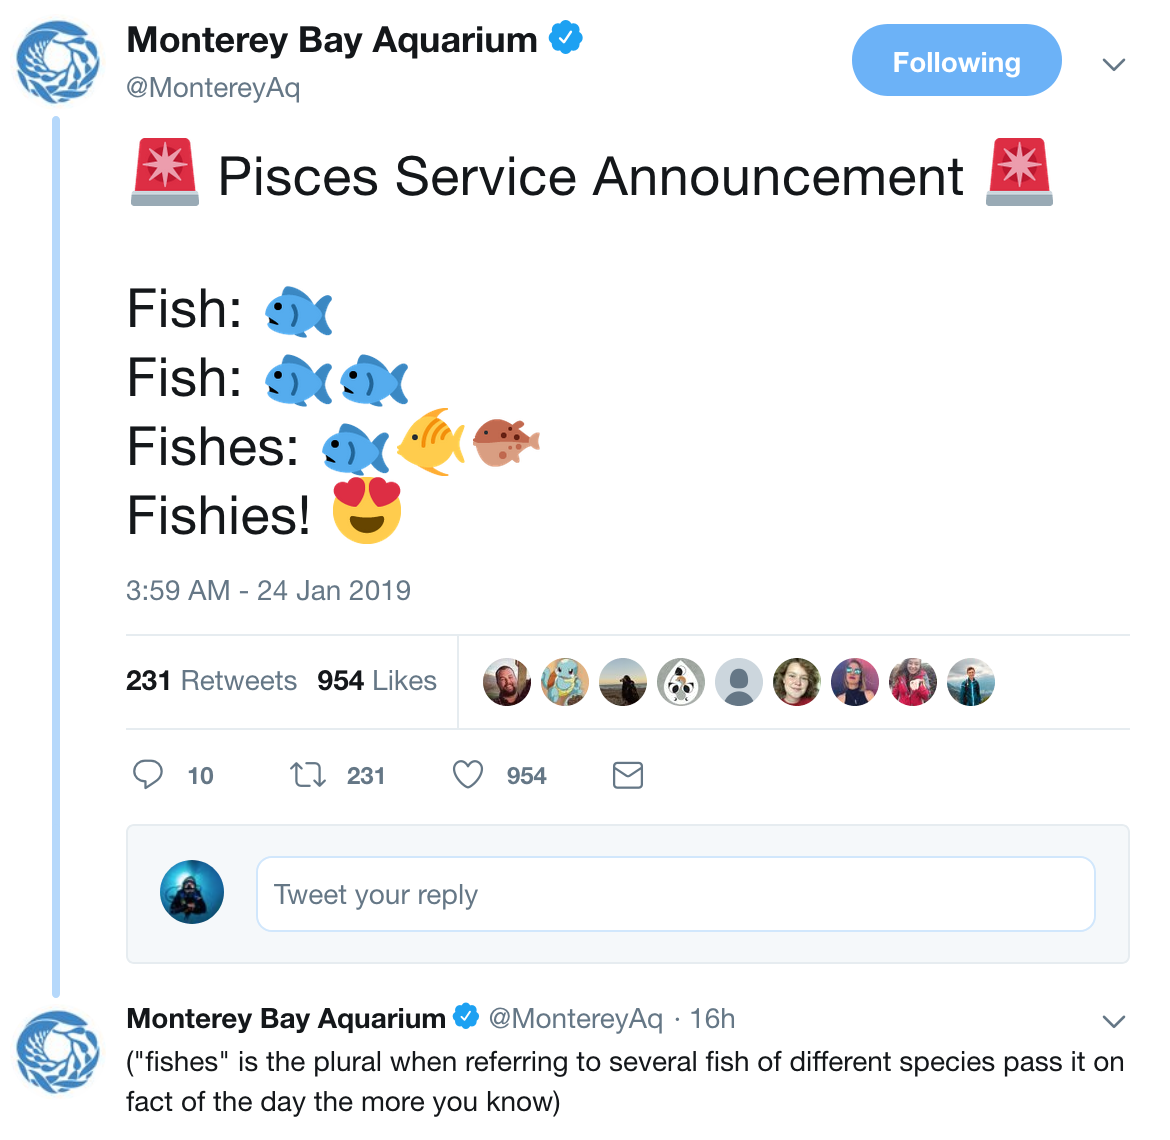 mad-as-a-marine-biologist:
“ FYI
Source
”
Tweets from the Monterey Bay Aquarium -
Pisces Service Announcement
Fish: [fish emoji]
Fish: [two identical fish emojis]
Fishes: [three fish emojis, each showing a different kind of fish]
Fishies! [heart-eyed...